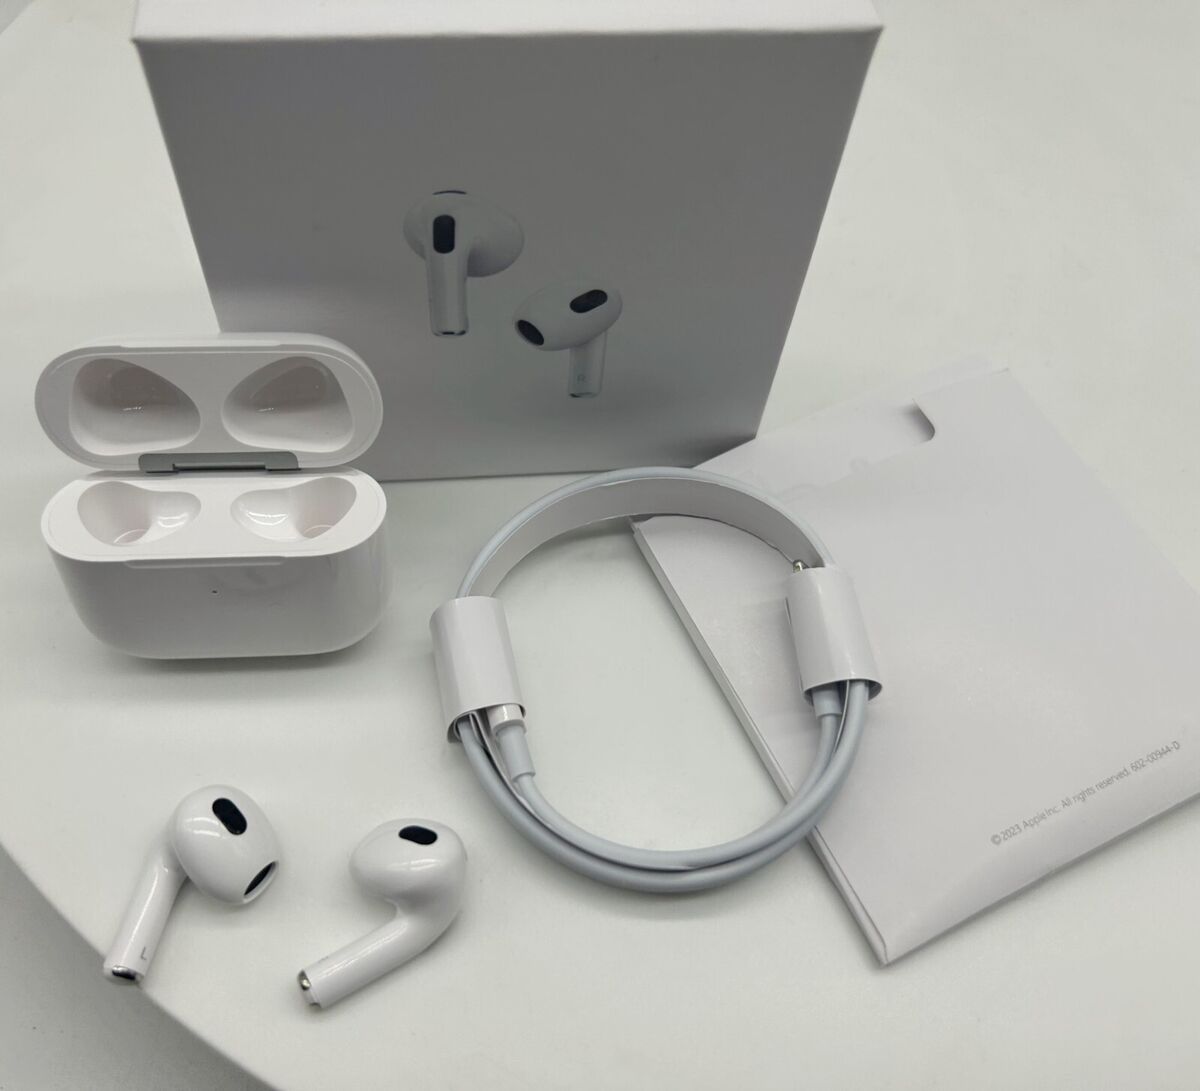 Airpods Pro (3rd generation)